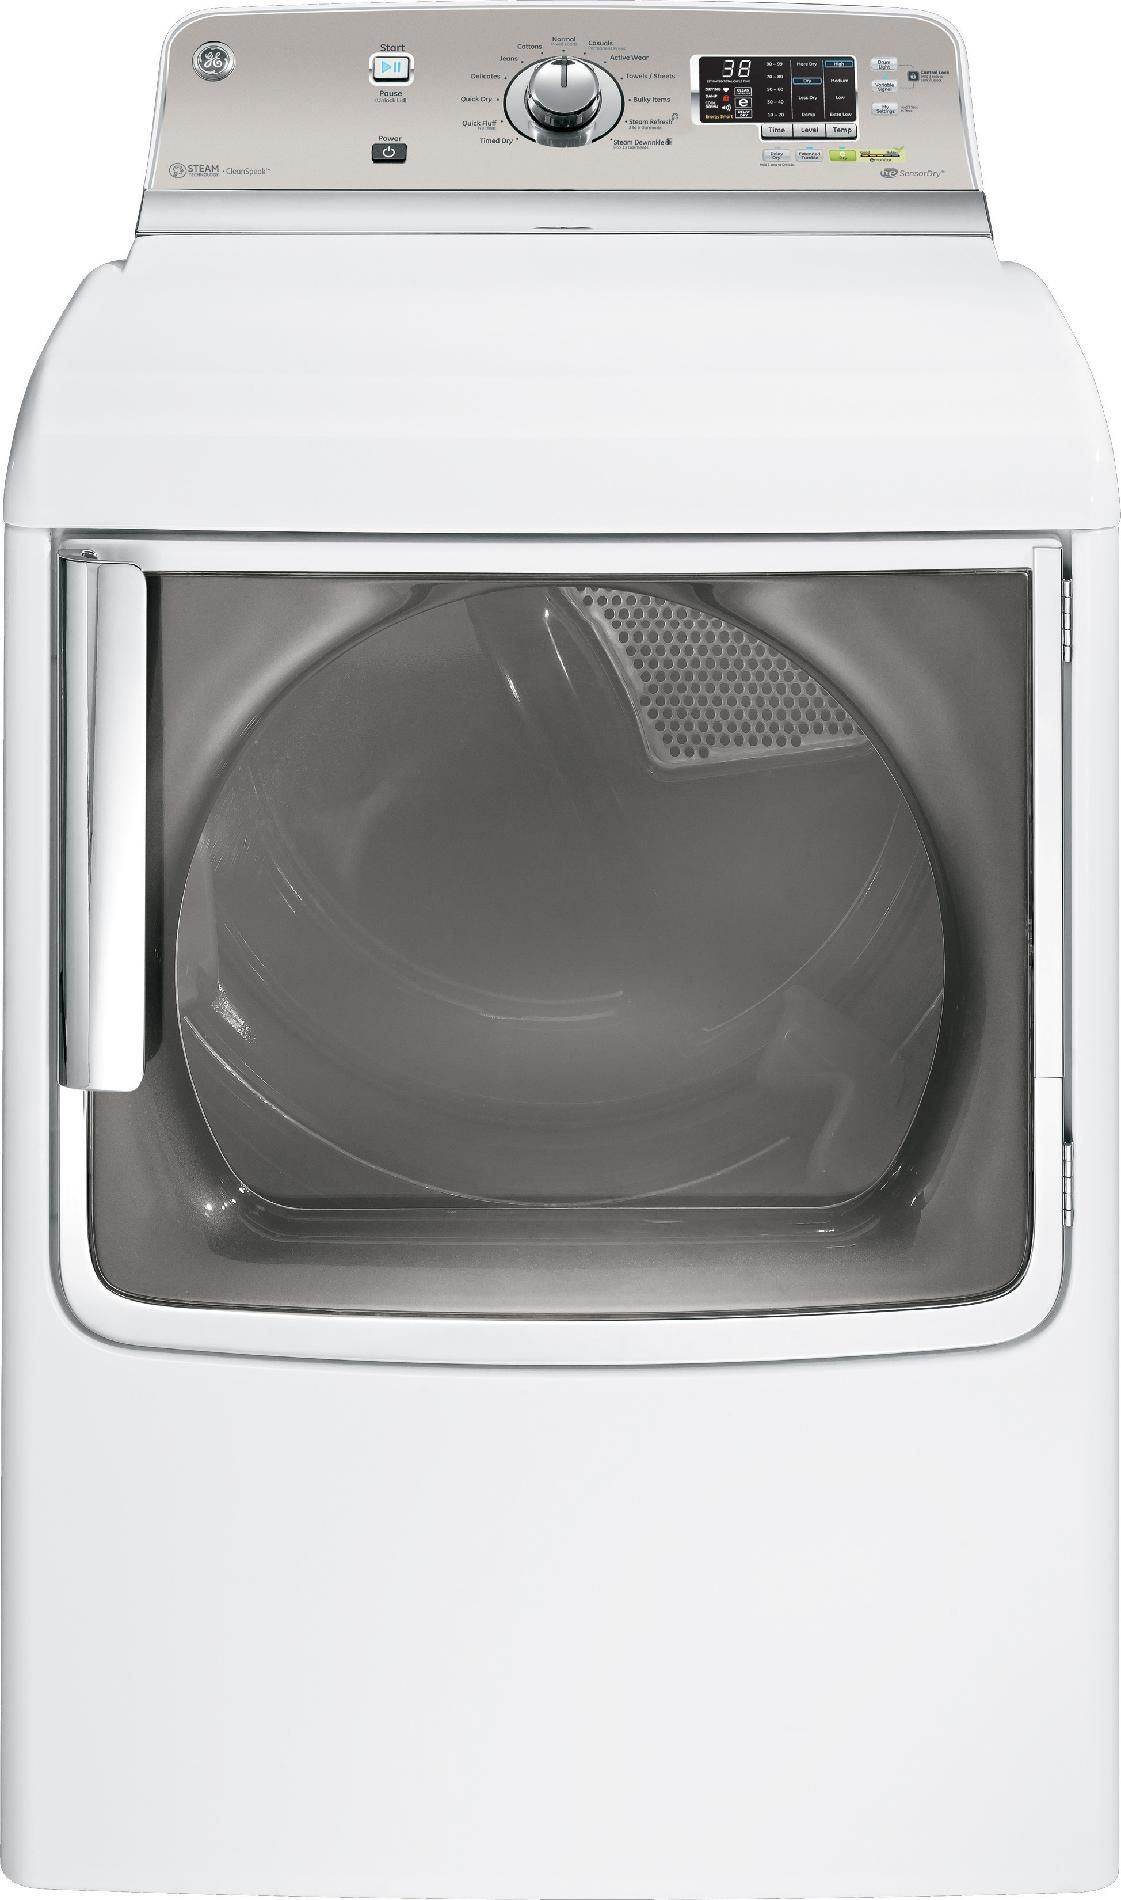 GE 7.8 cu. ft. Steam Electric Dryer w/ Stainless Steel Drum White 7.0 cu. ft. and greater